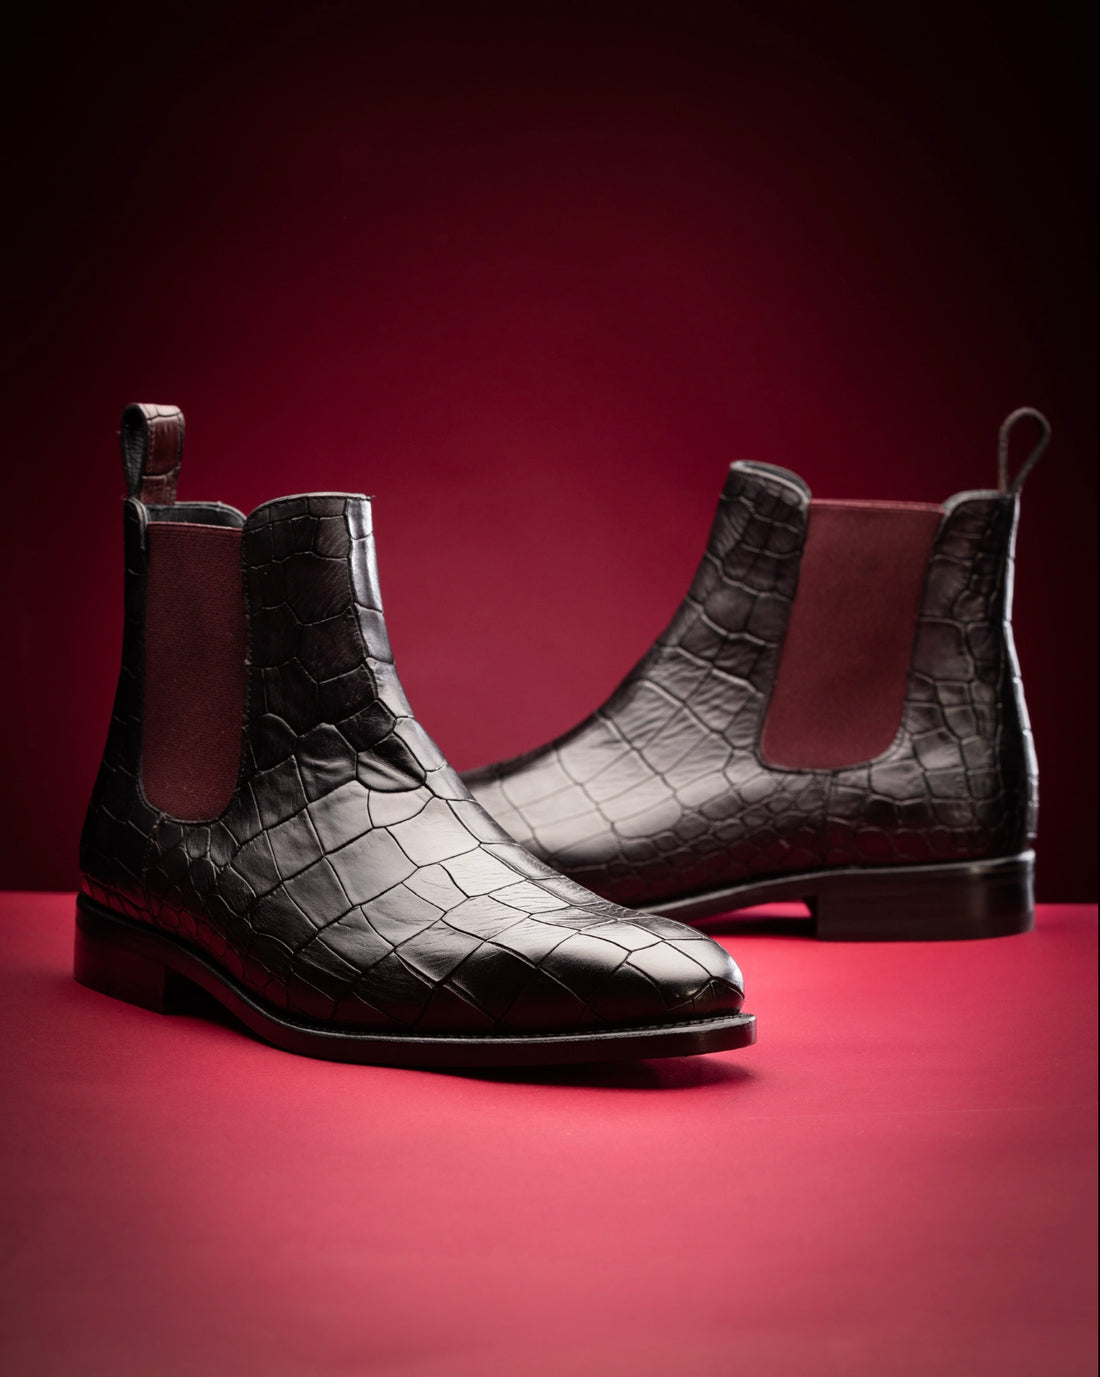 Croco Chelsea Boots - Black - Boots by Urbbana